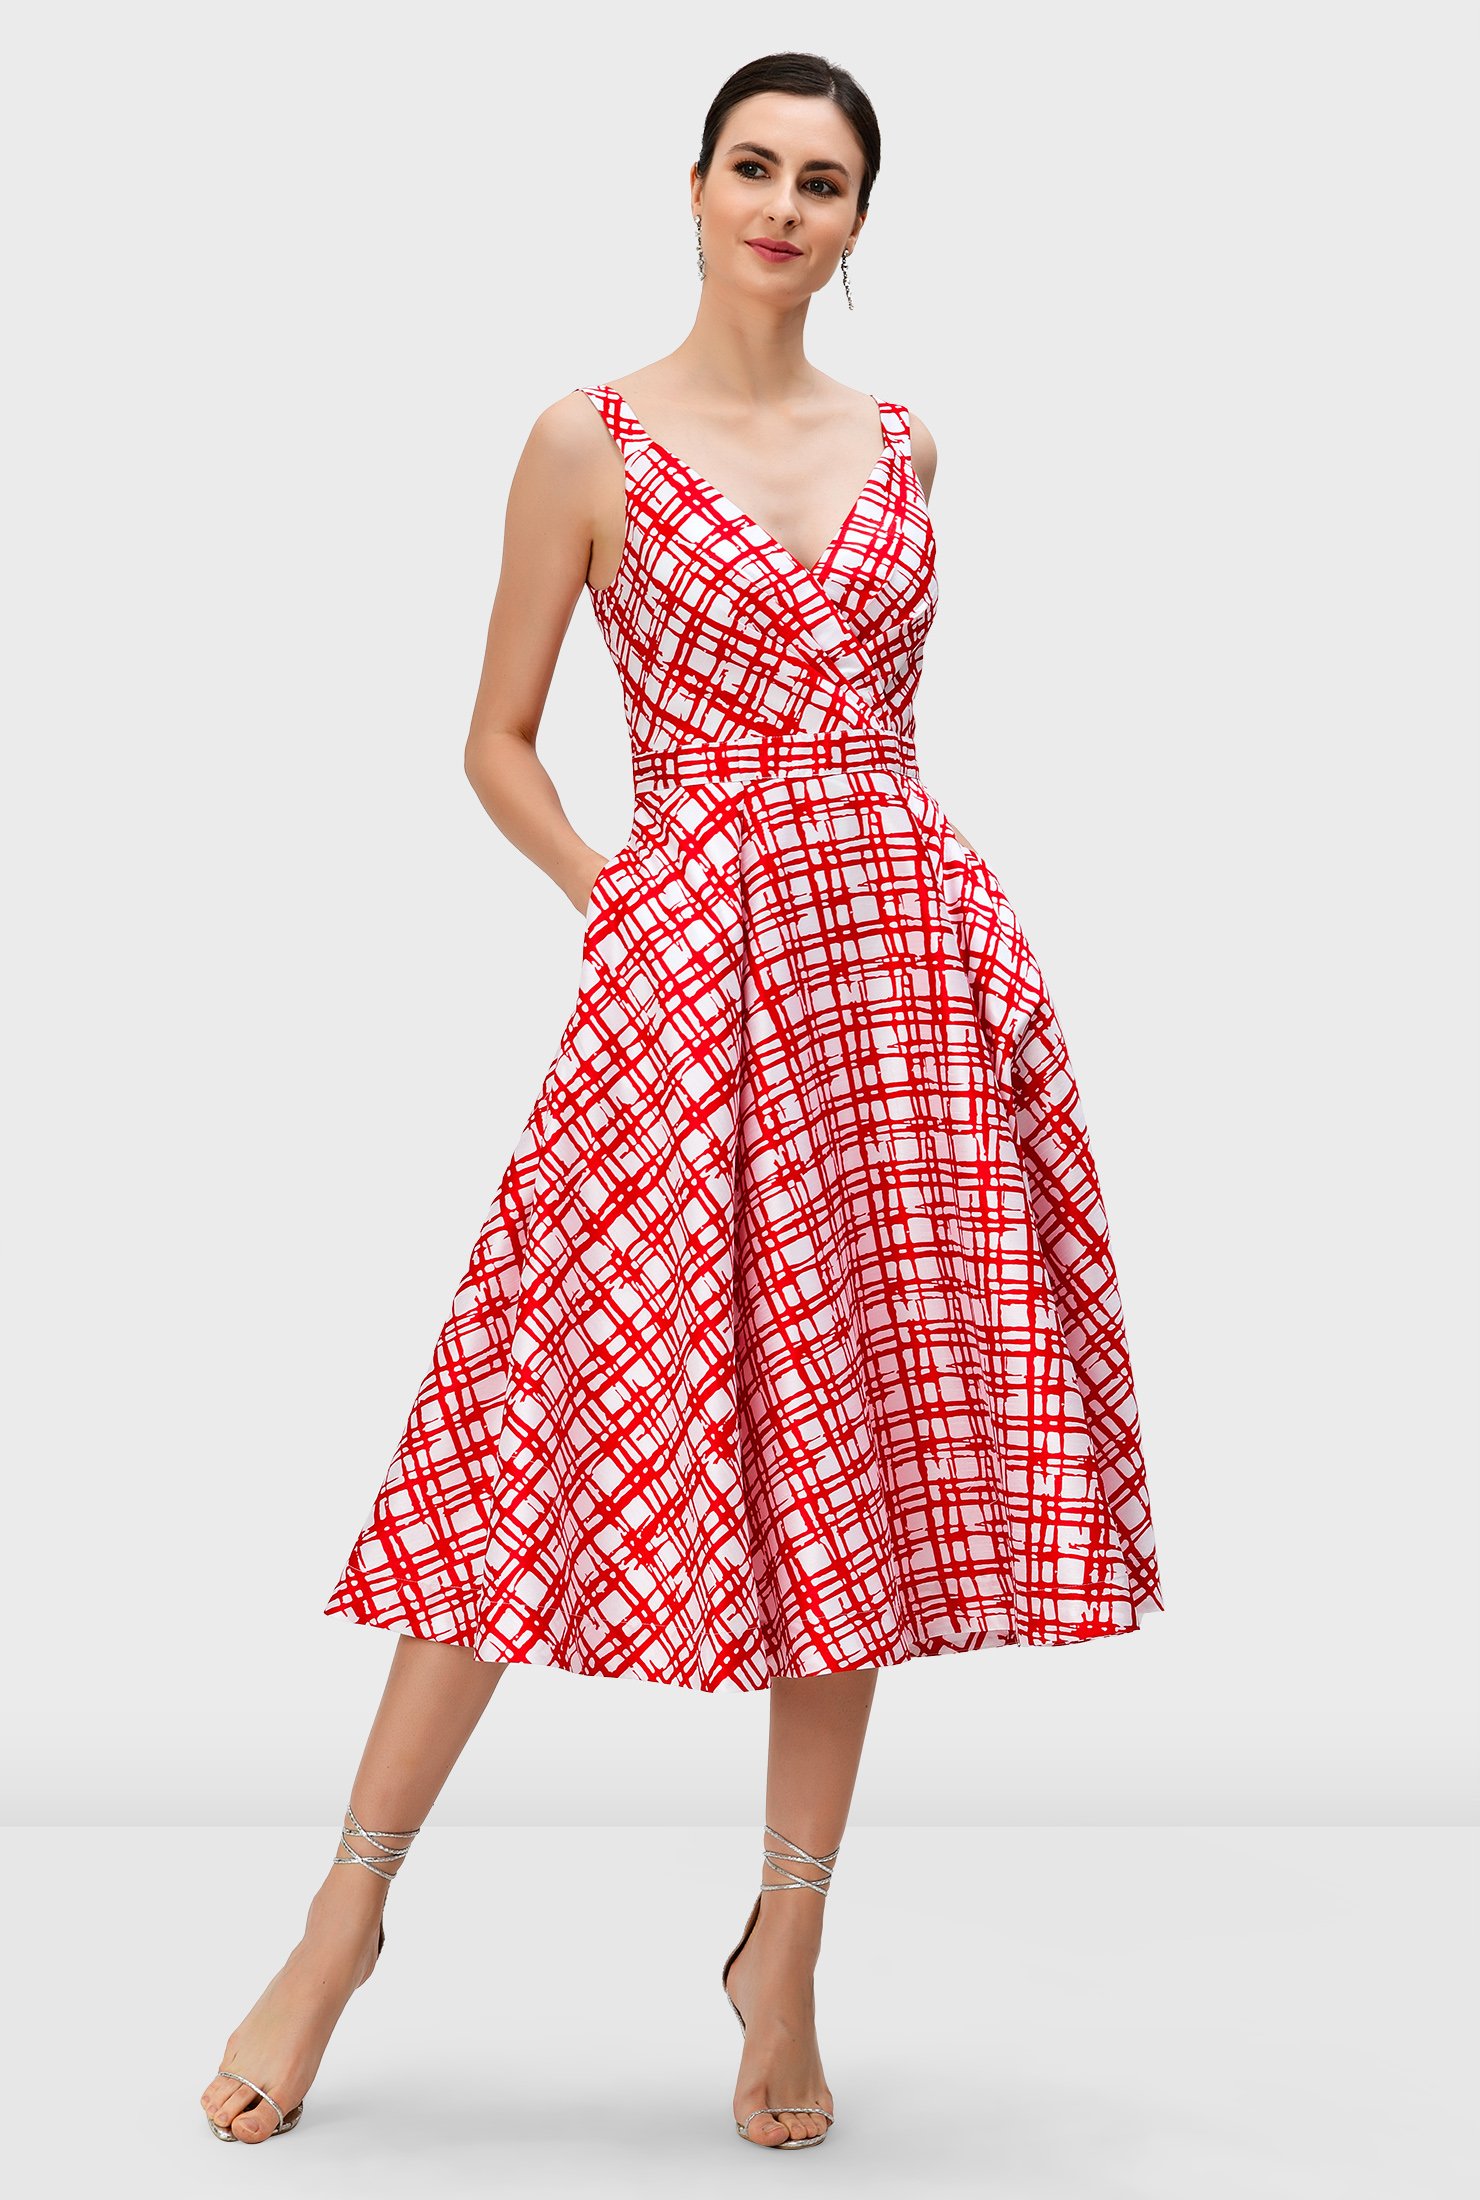 Our fit-and-flare dress in check-print dupioni is styled with a full skirt for that feminine swish, while a pleated surplice bodice creates a flattering shape.